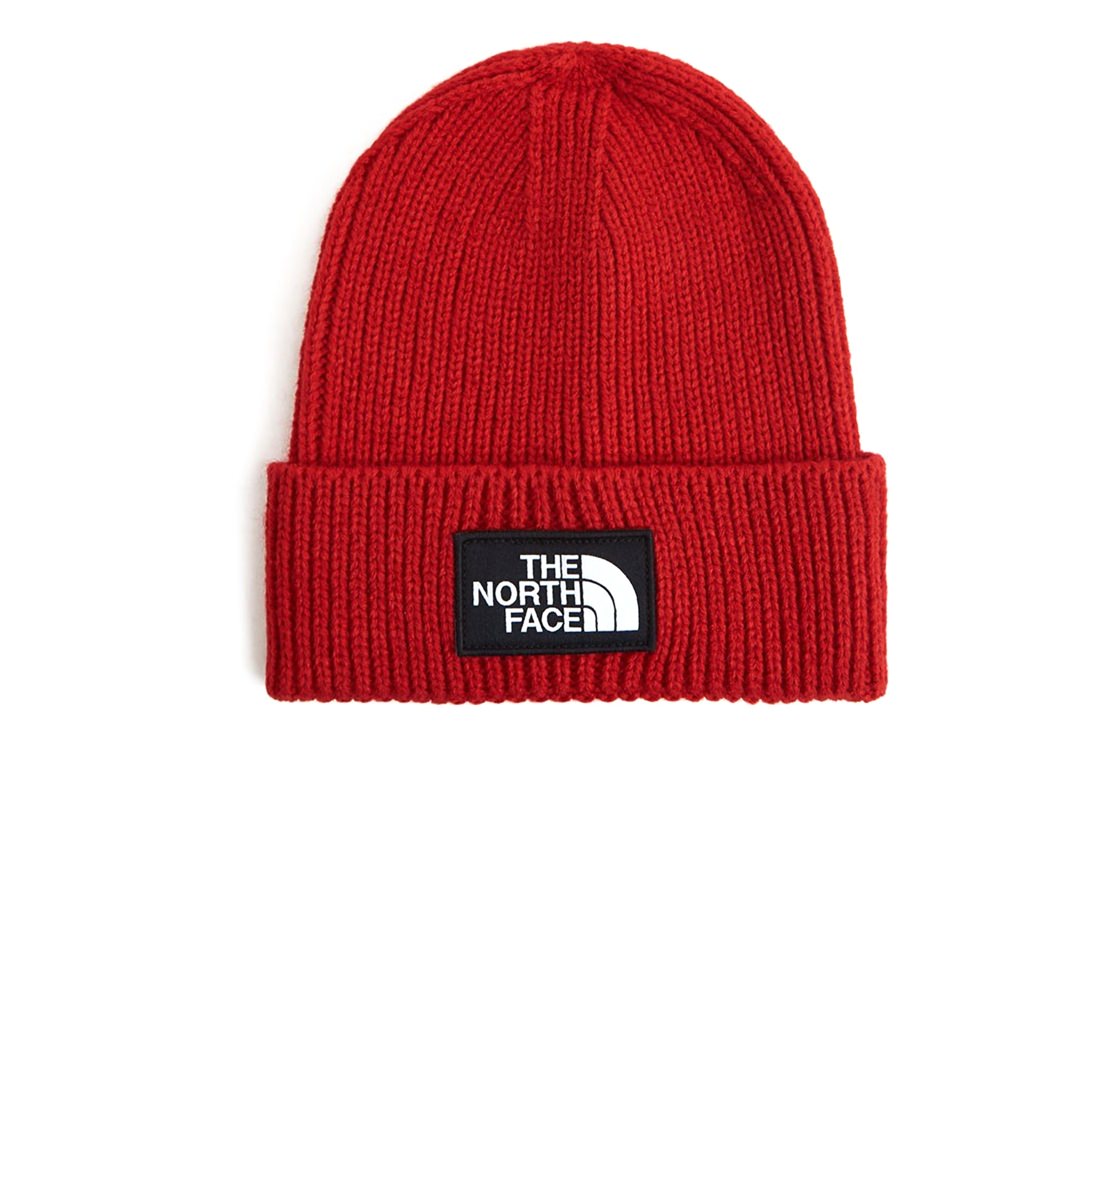 The North Face Knit Beanie